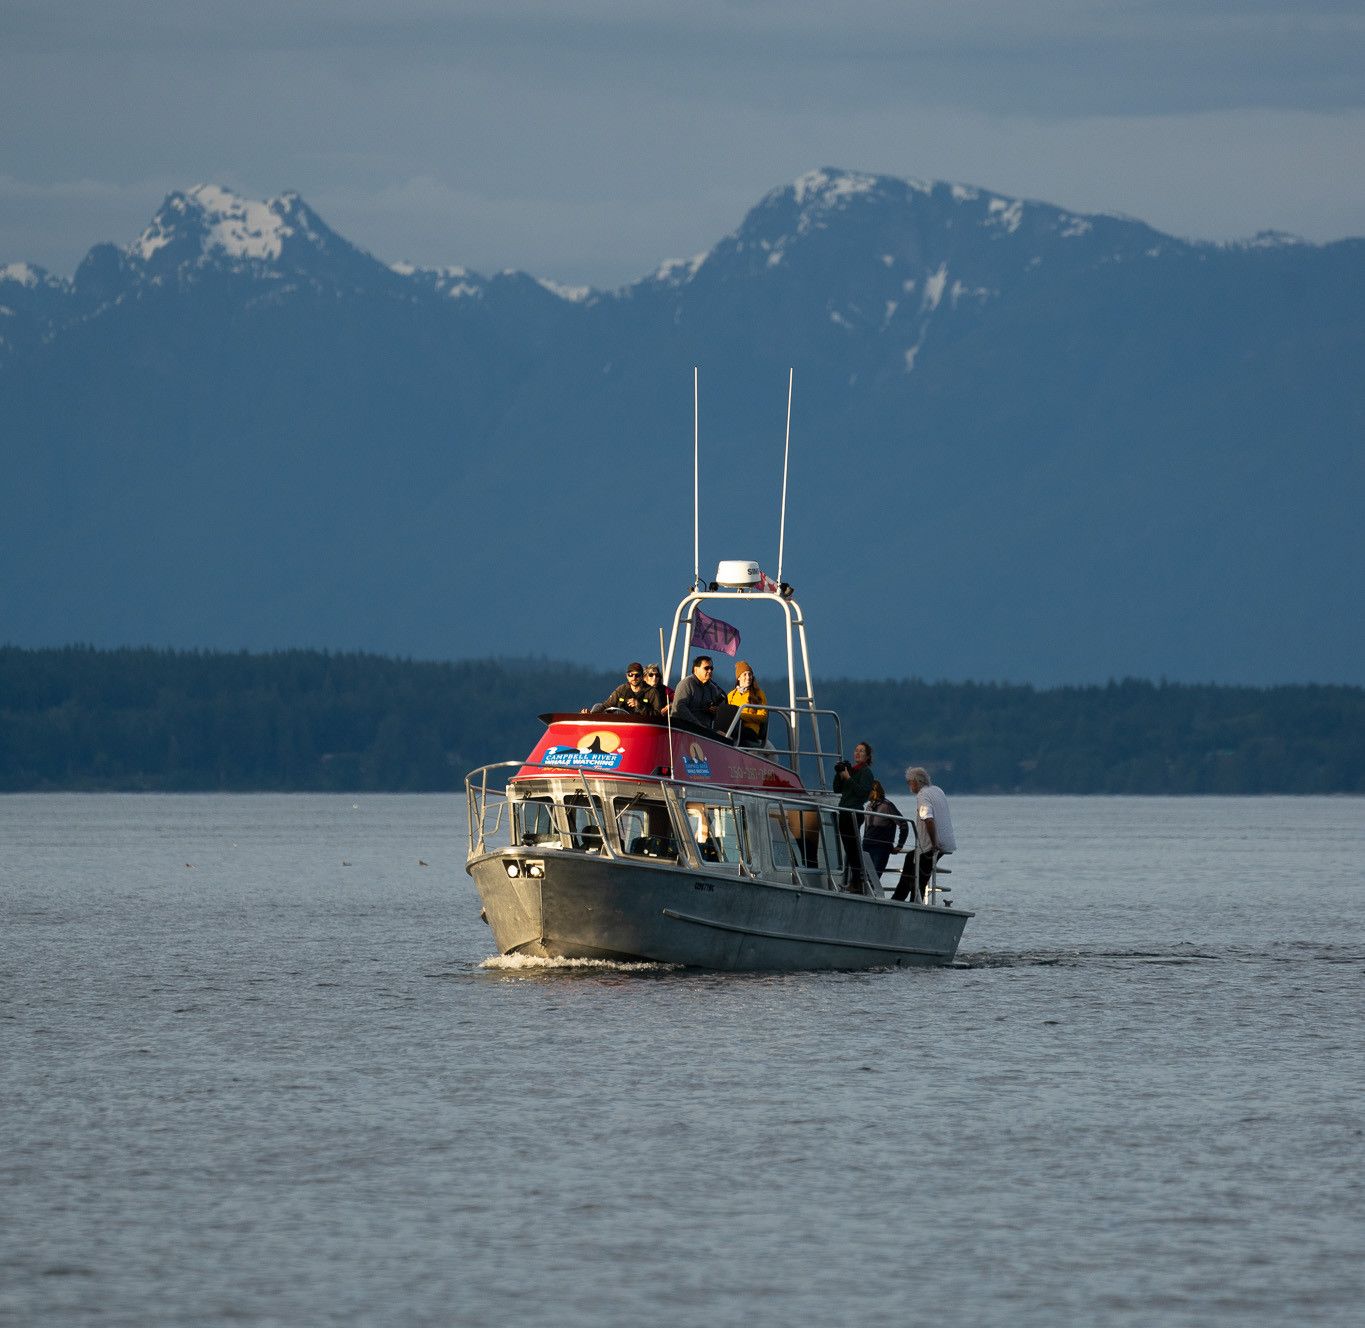 Covered Whale Watching Vessel out in the ocean. There are mountains in the foreground. There are guests on the the lower deck as well as the upper viewing deck.